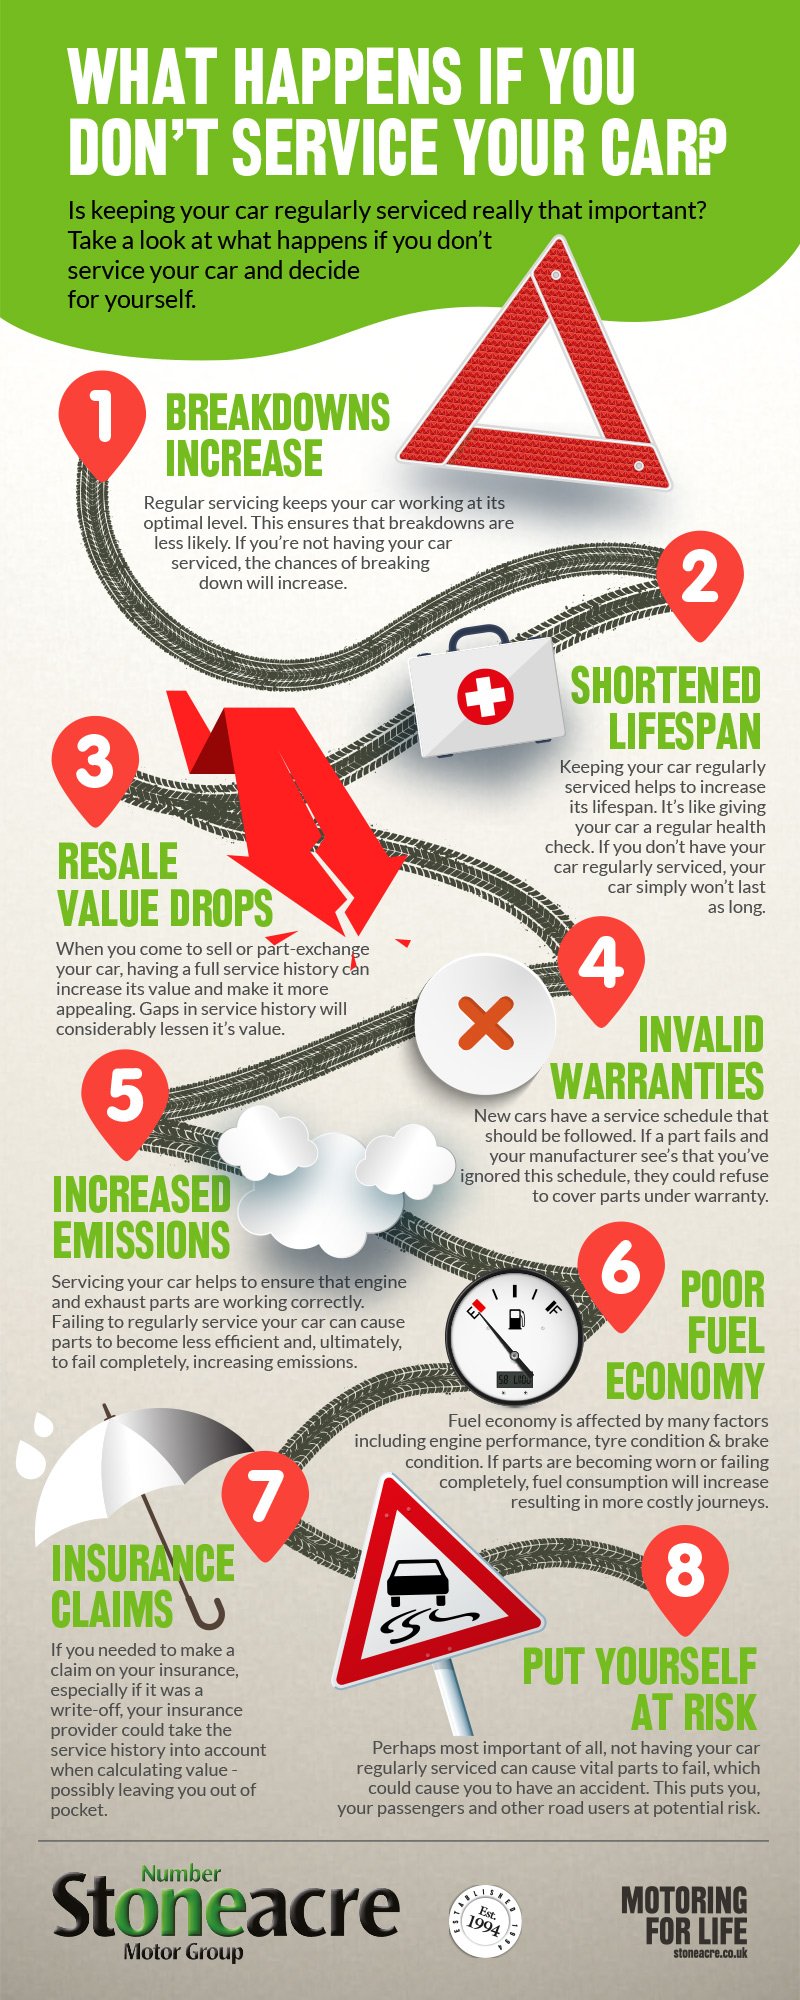 A useful infographic about what happens if you don't service your car.